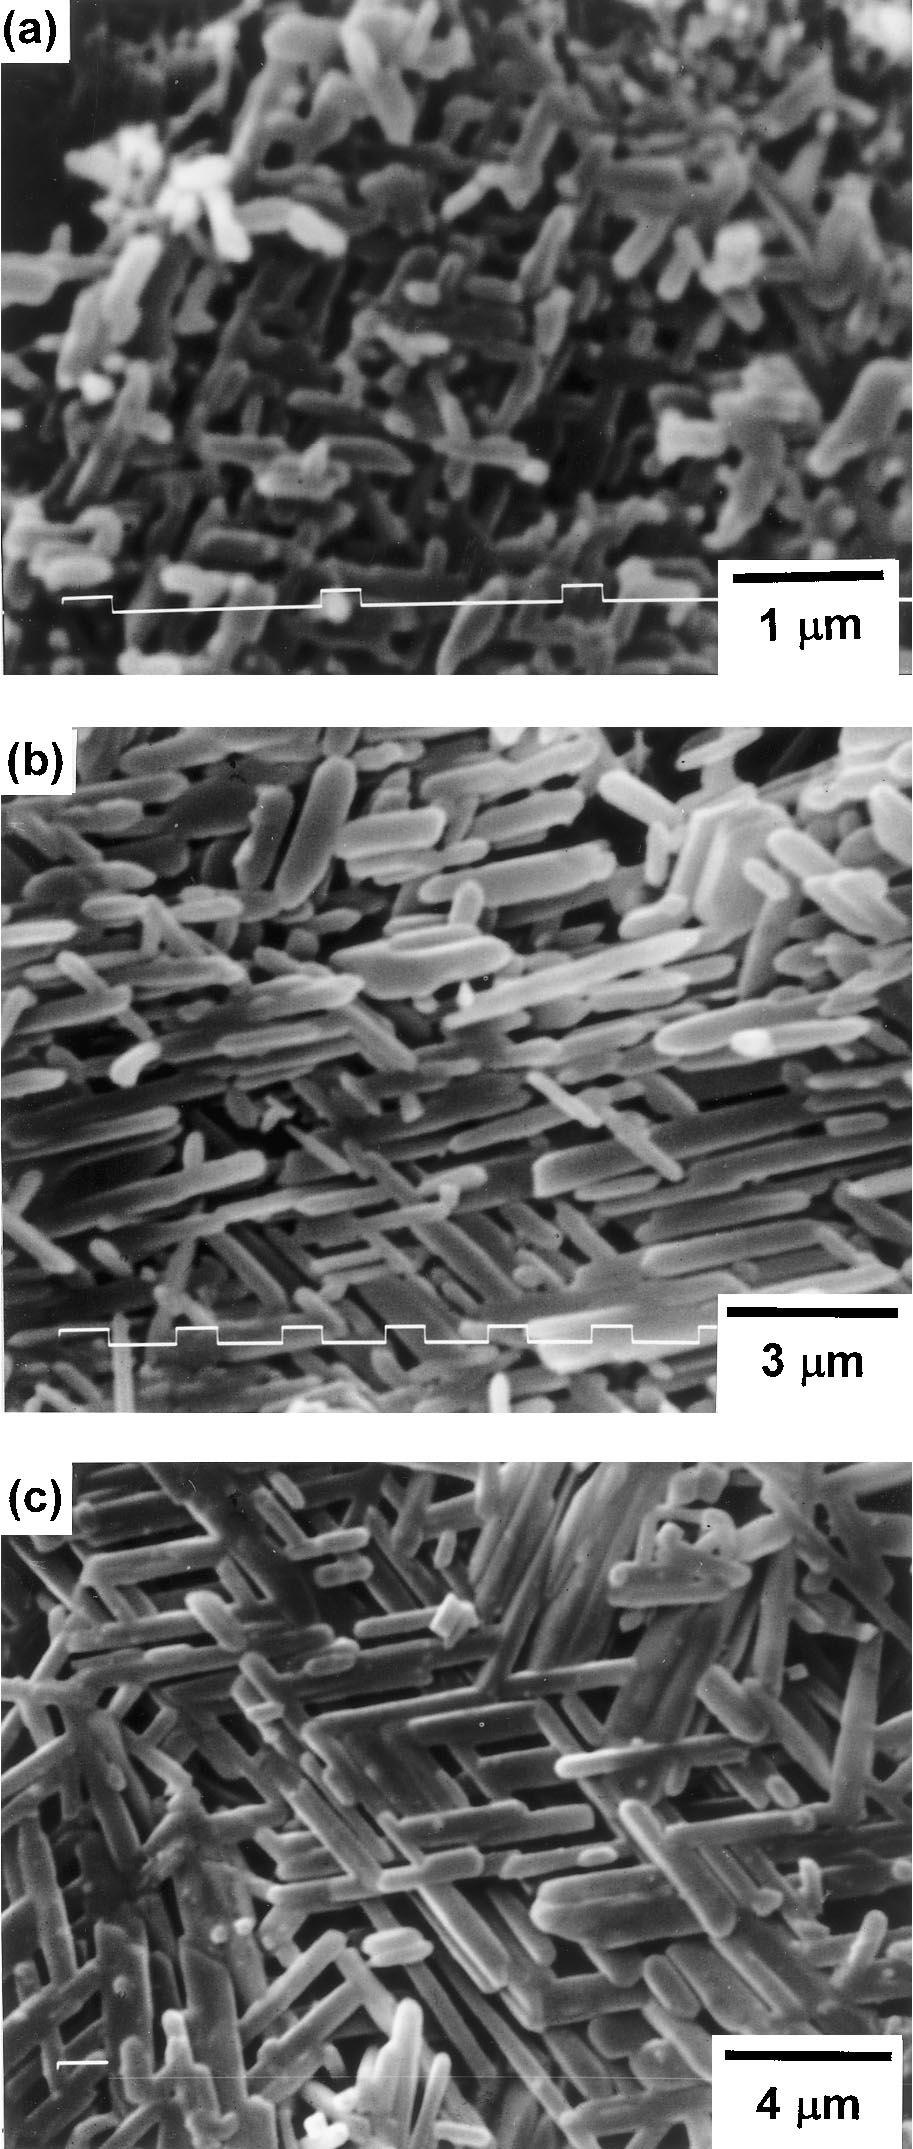 C.Y. Chen et al. / Ceramics International 26 (2000) 715±720 719 grains tend to form on the surface of kaolinite particles [15]. Comparing the XRD patterns before and after sintering, Figs.